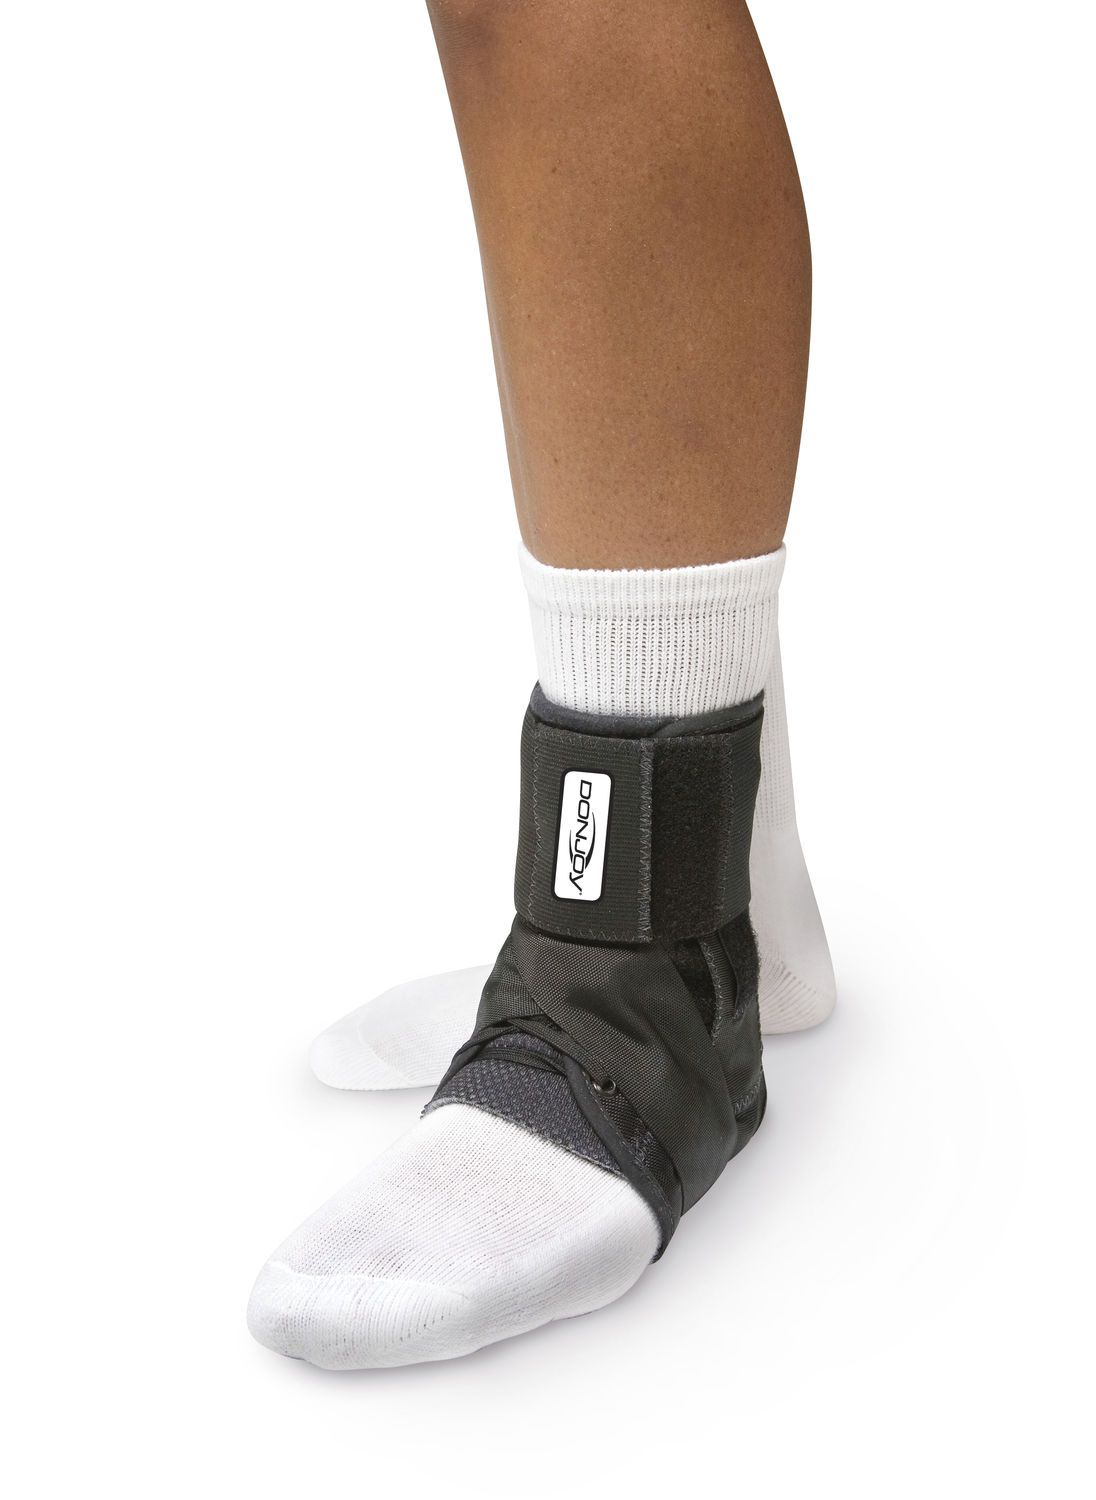 Ankle orthosis (orthopedic immobilization) / ankle strap / lace-up / open heel Stabilizing Pro Ankle DonJoy